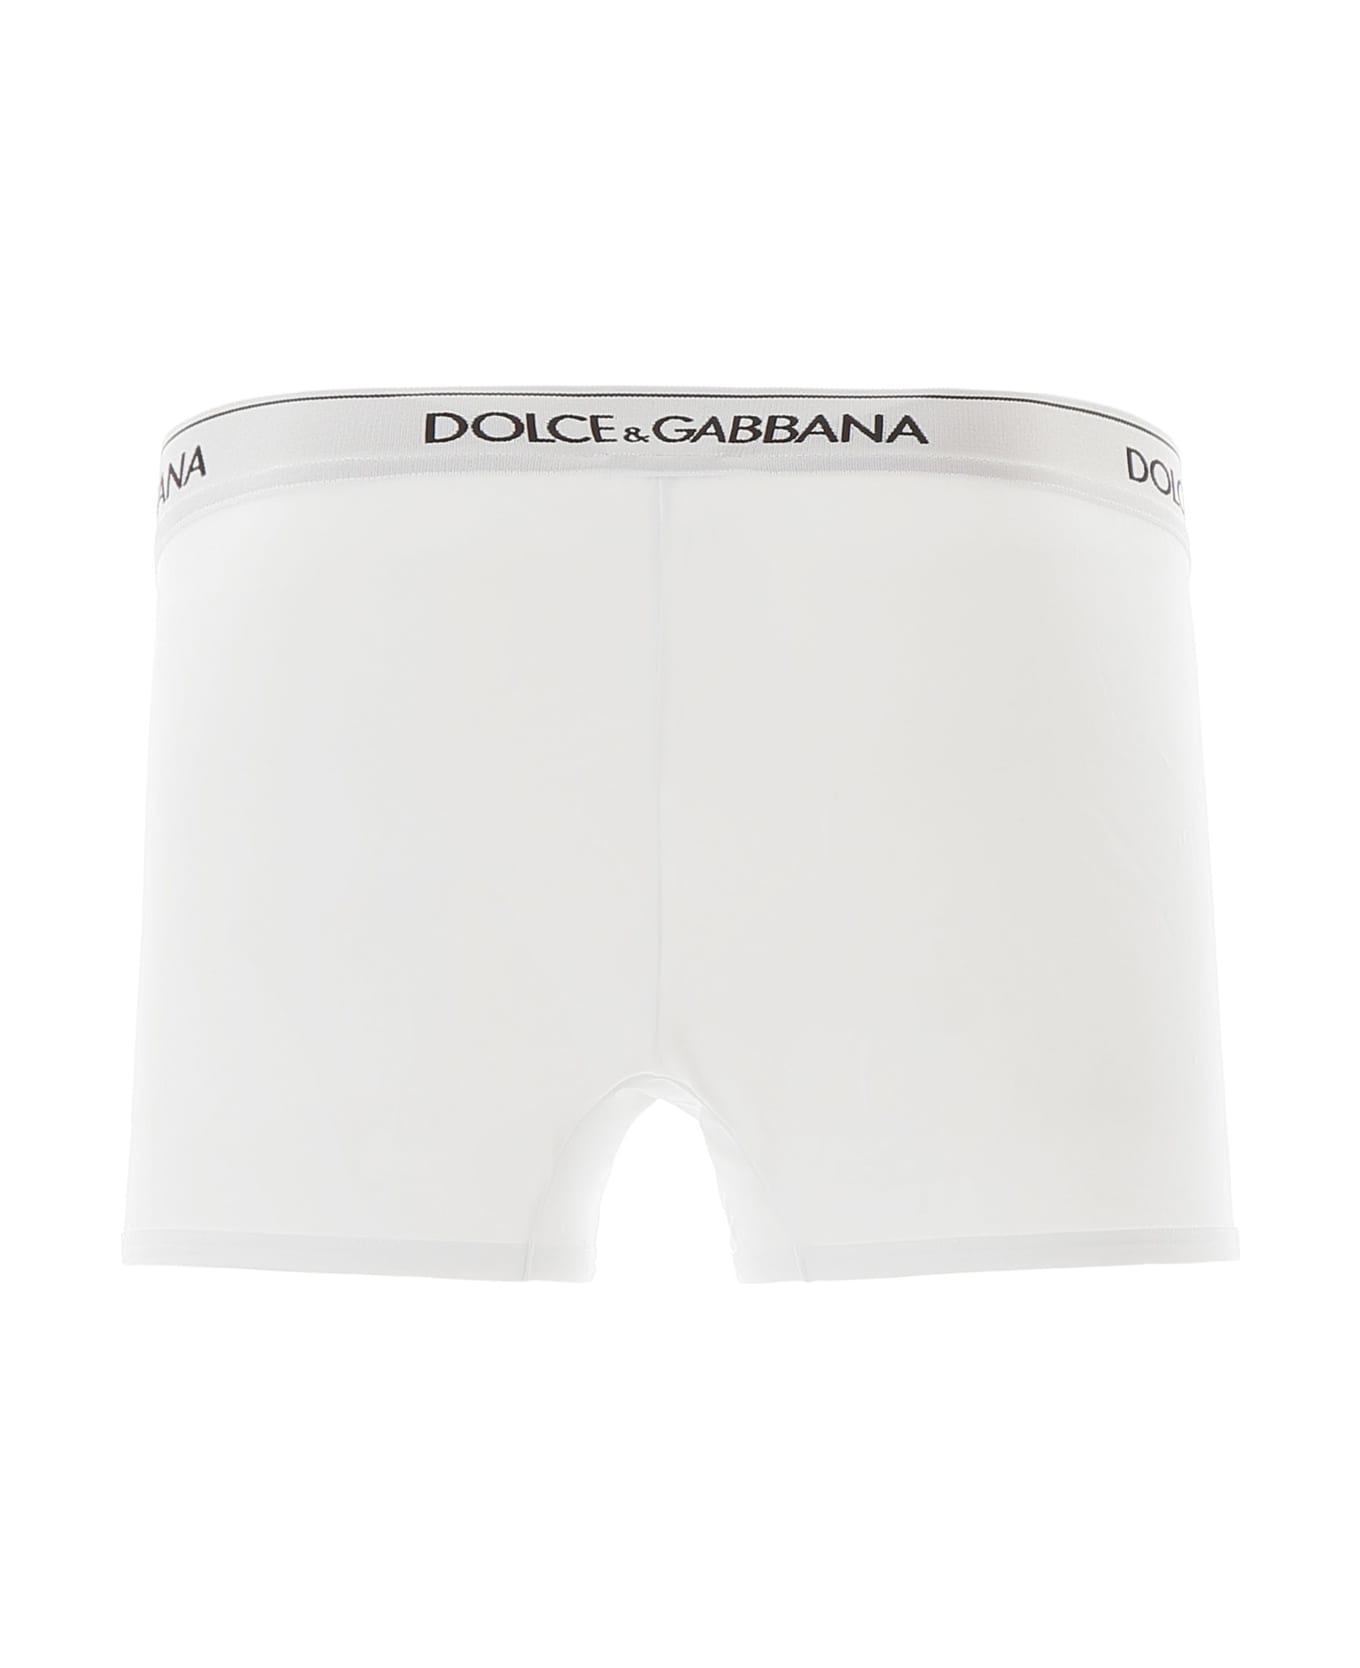 Dolce & Gabbana Pack Of Two Boxers - White